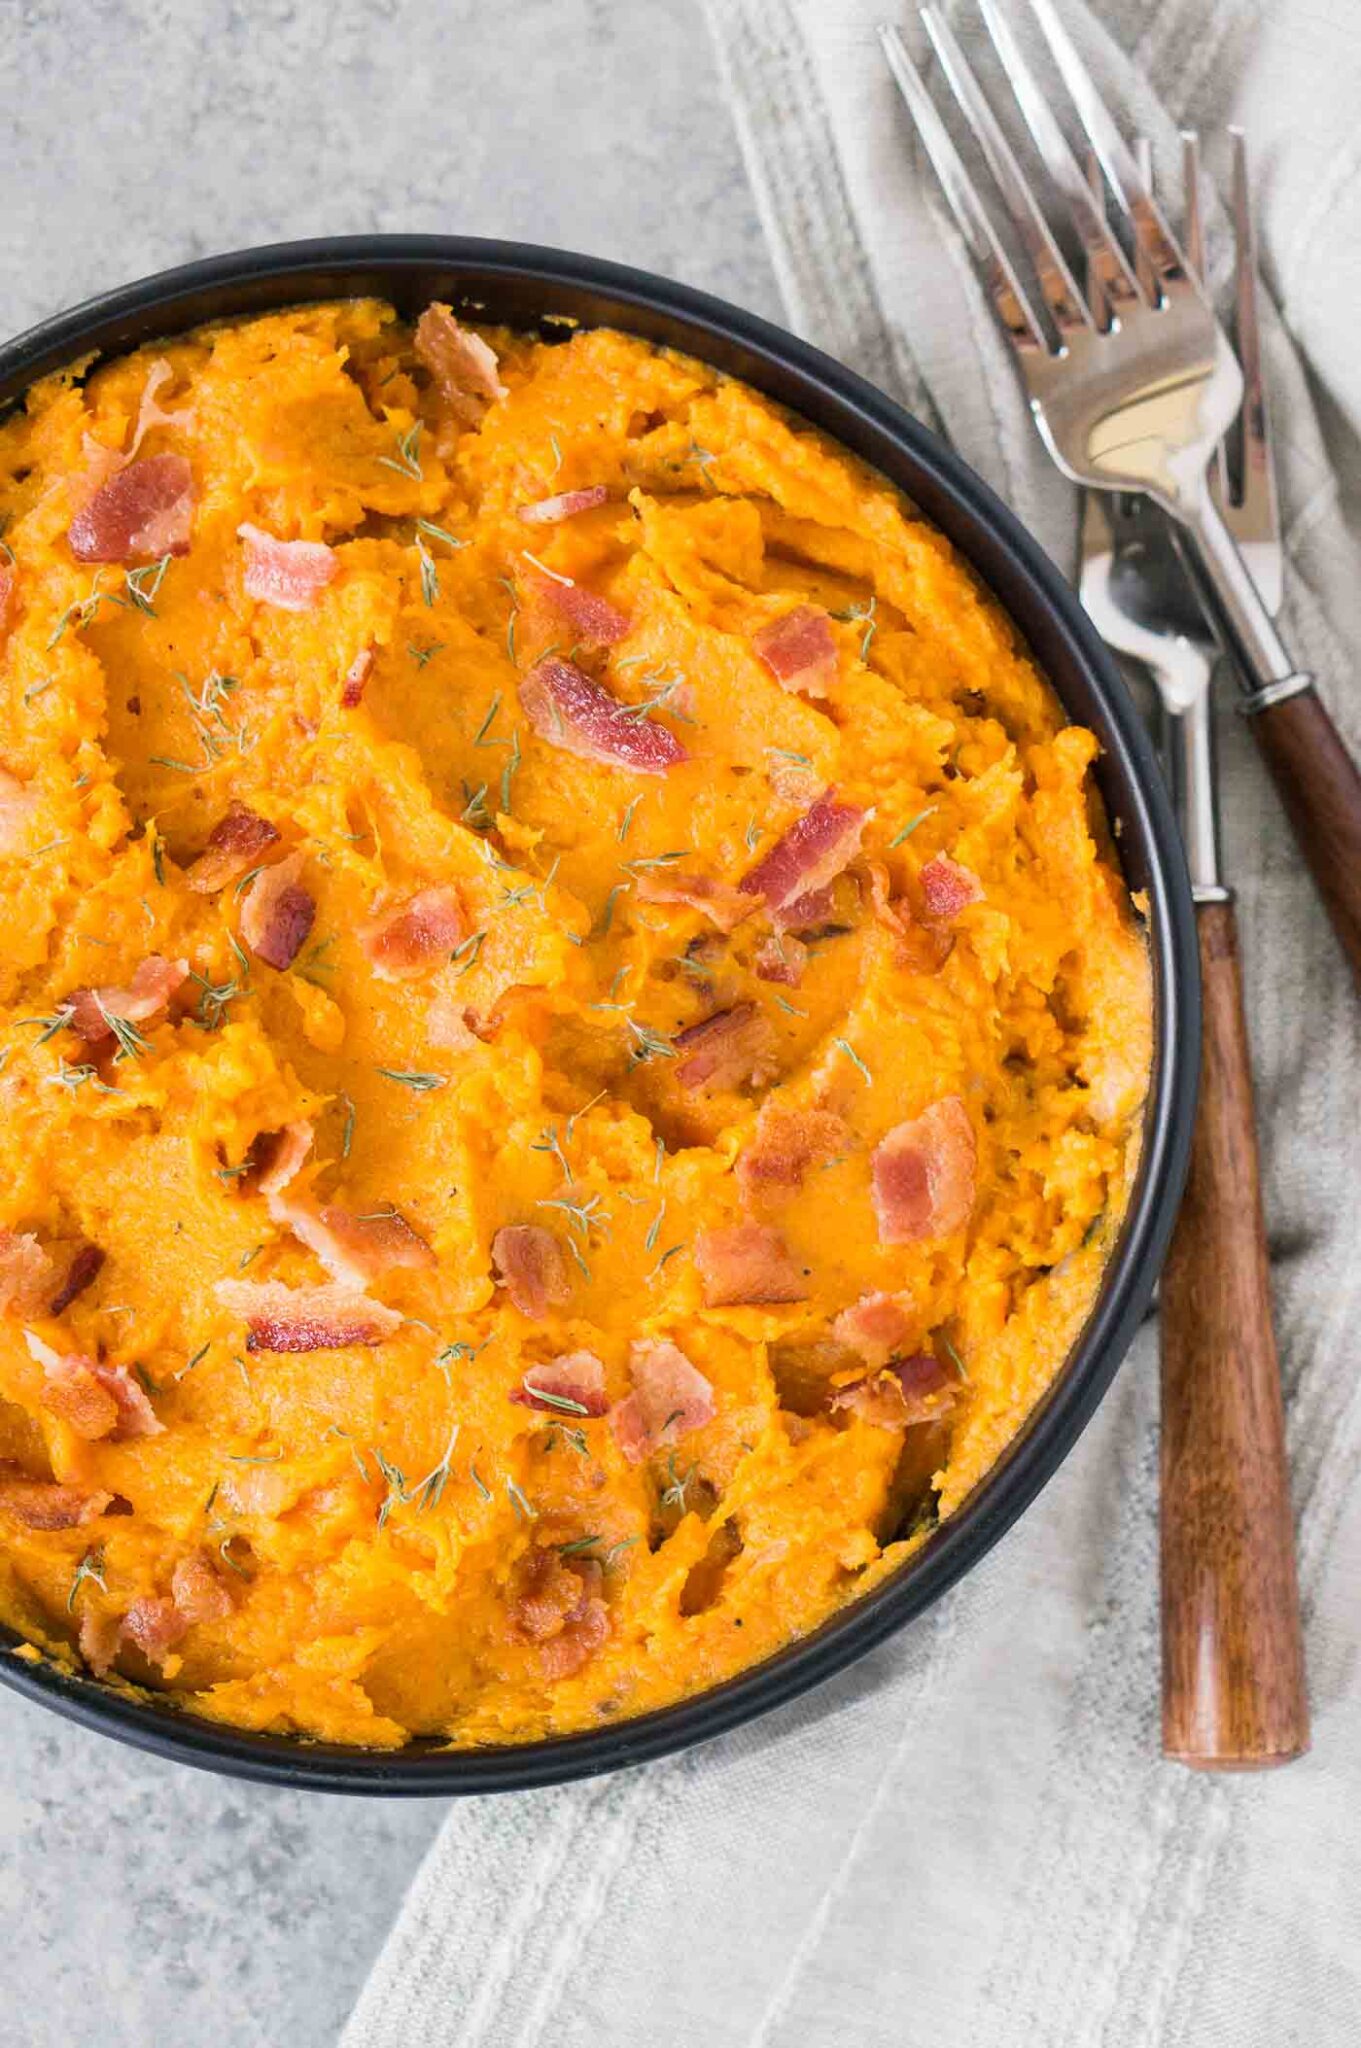 mashed sweet potatoes with bacon in a bowl